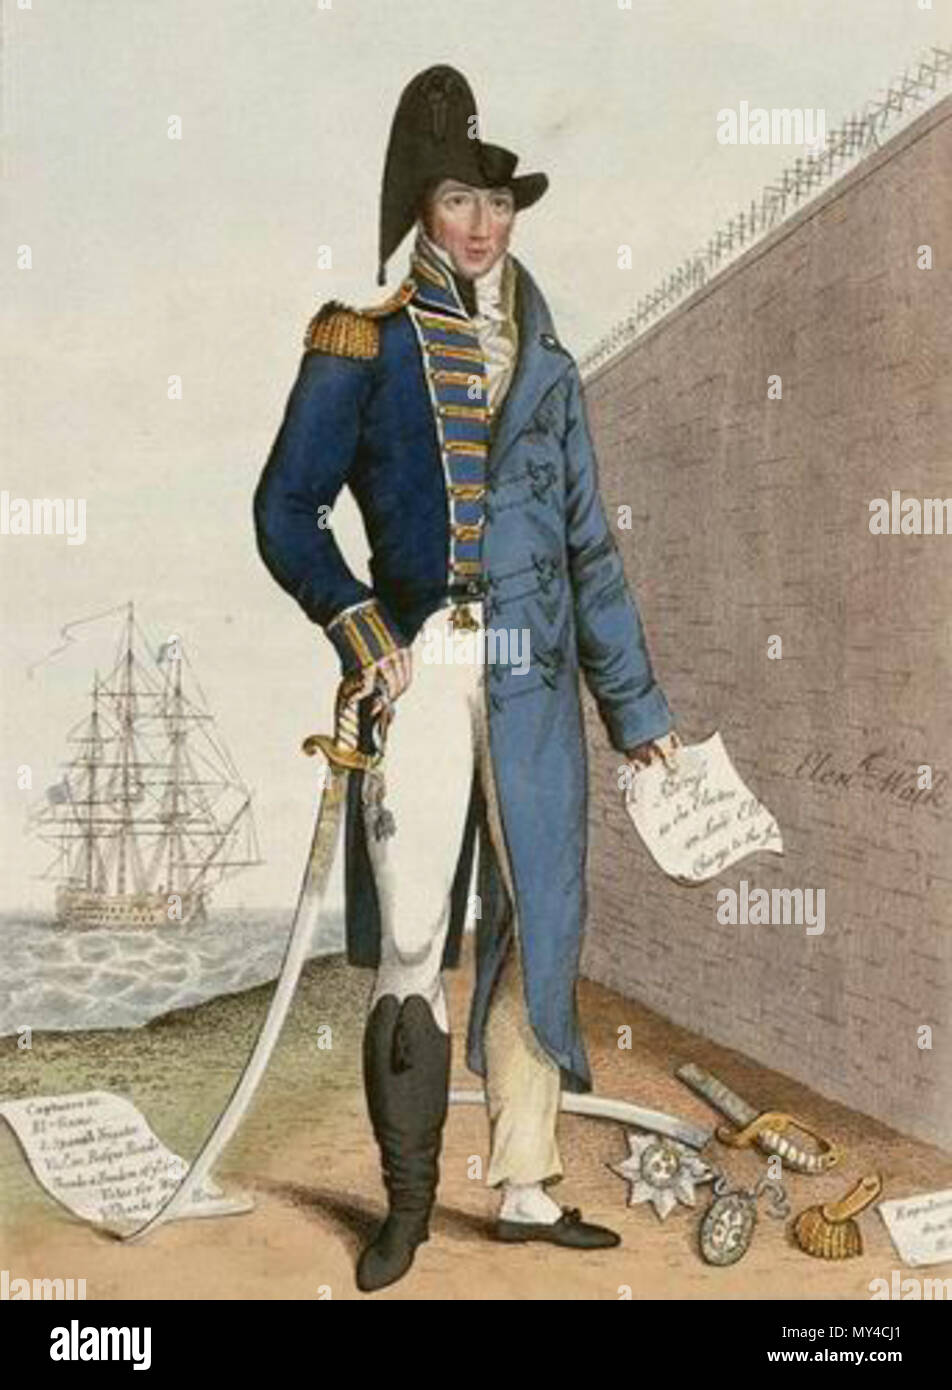 . English: Things as they have been. Things as they now are. Caricature of Lord Cochrane made shortly after his conviction for fraud in 1814. The left side of the image depicts Cochrane as a heroic naval officer. He wears his Royal Navy uniform and on the floor beside him is a list of his notable battles. The right side depicts him as a disgraced civilian within the walls of the King's Bench Prison. His sword, epaulette and badge of the Order of the Bath lay broken and scattered on the floor. 8 May 1815. C Dyer (publisher) 116 Cochrane Stock Exchange Stock Photo